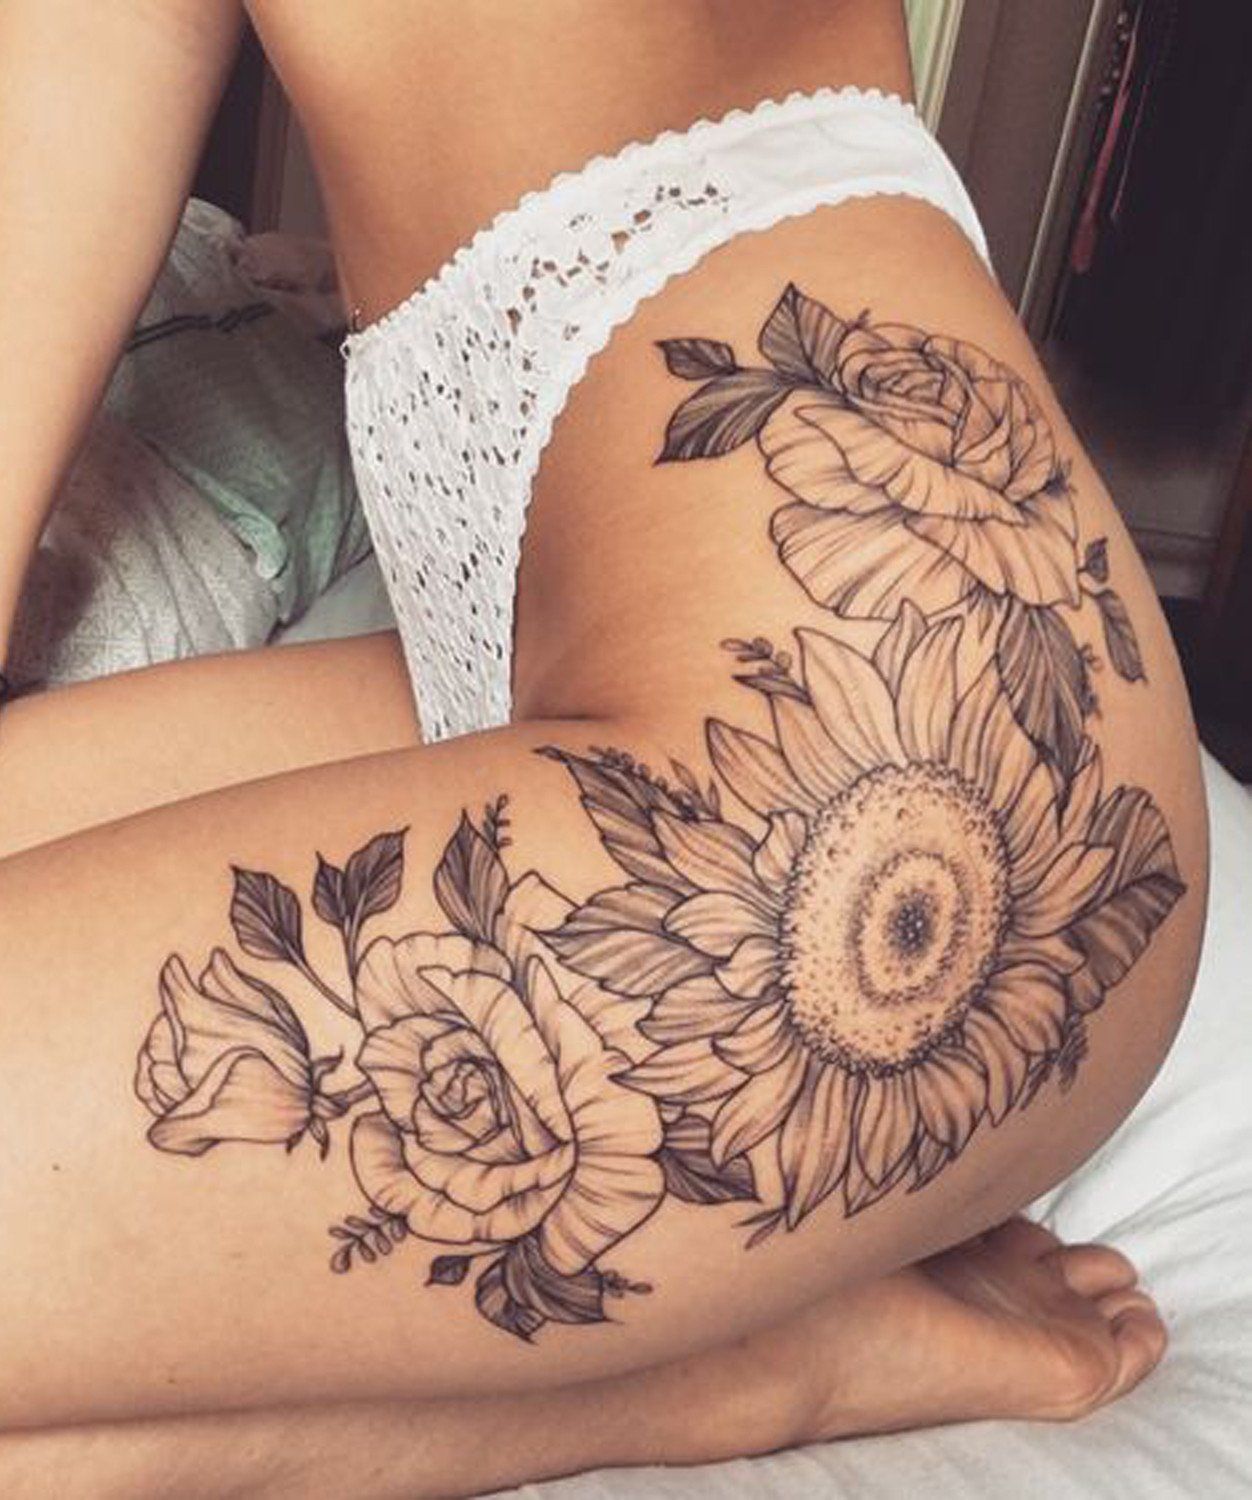 Vintage Black and White Realistic Sunflower Floral Leg Thigh Tattoo Ideas for Women at MyBodiArt.com